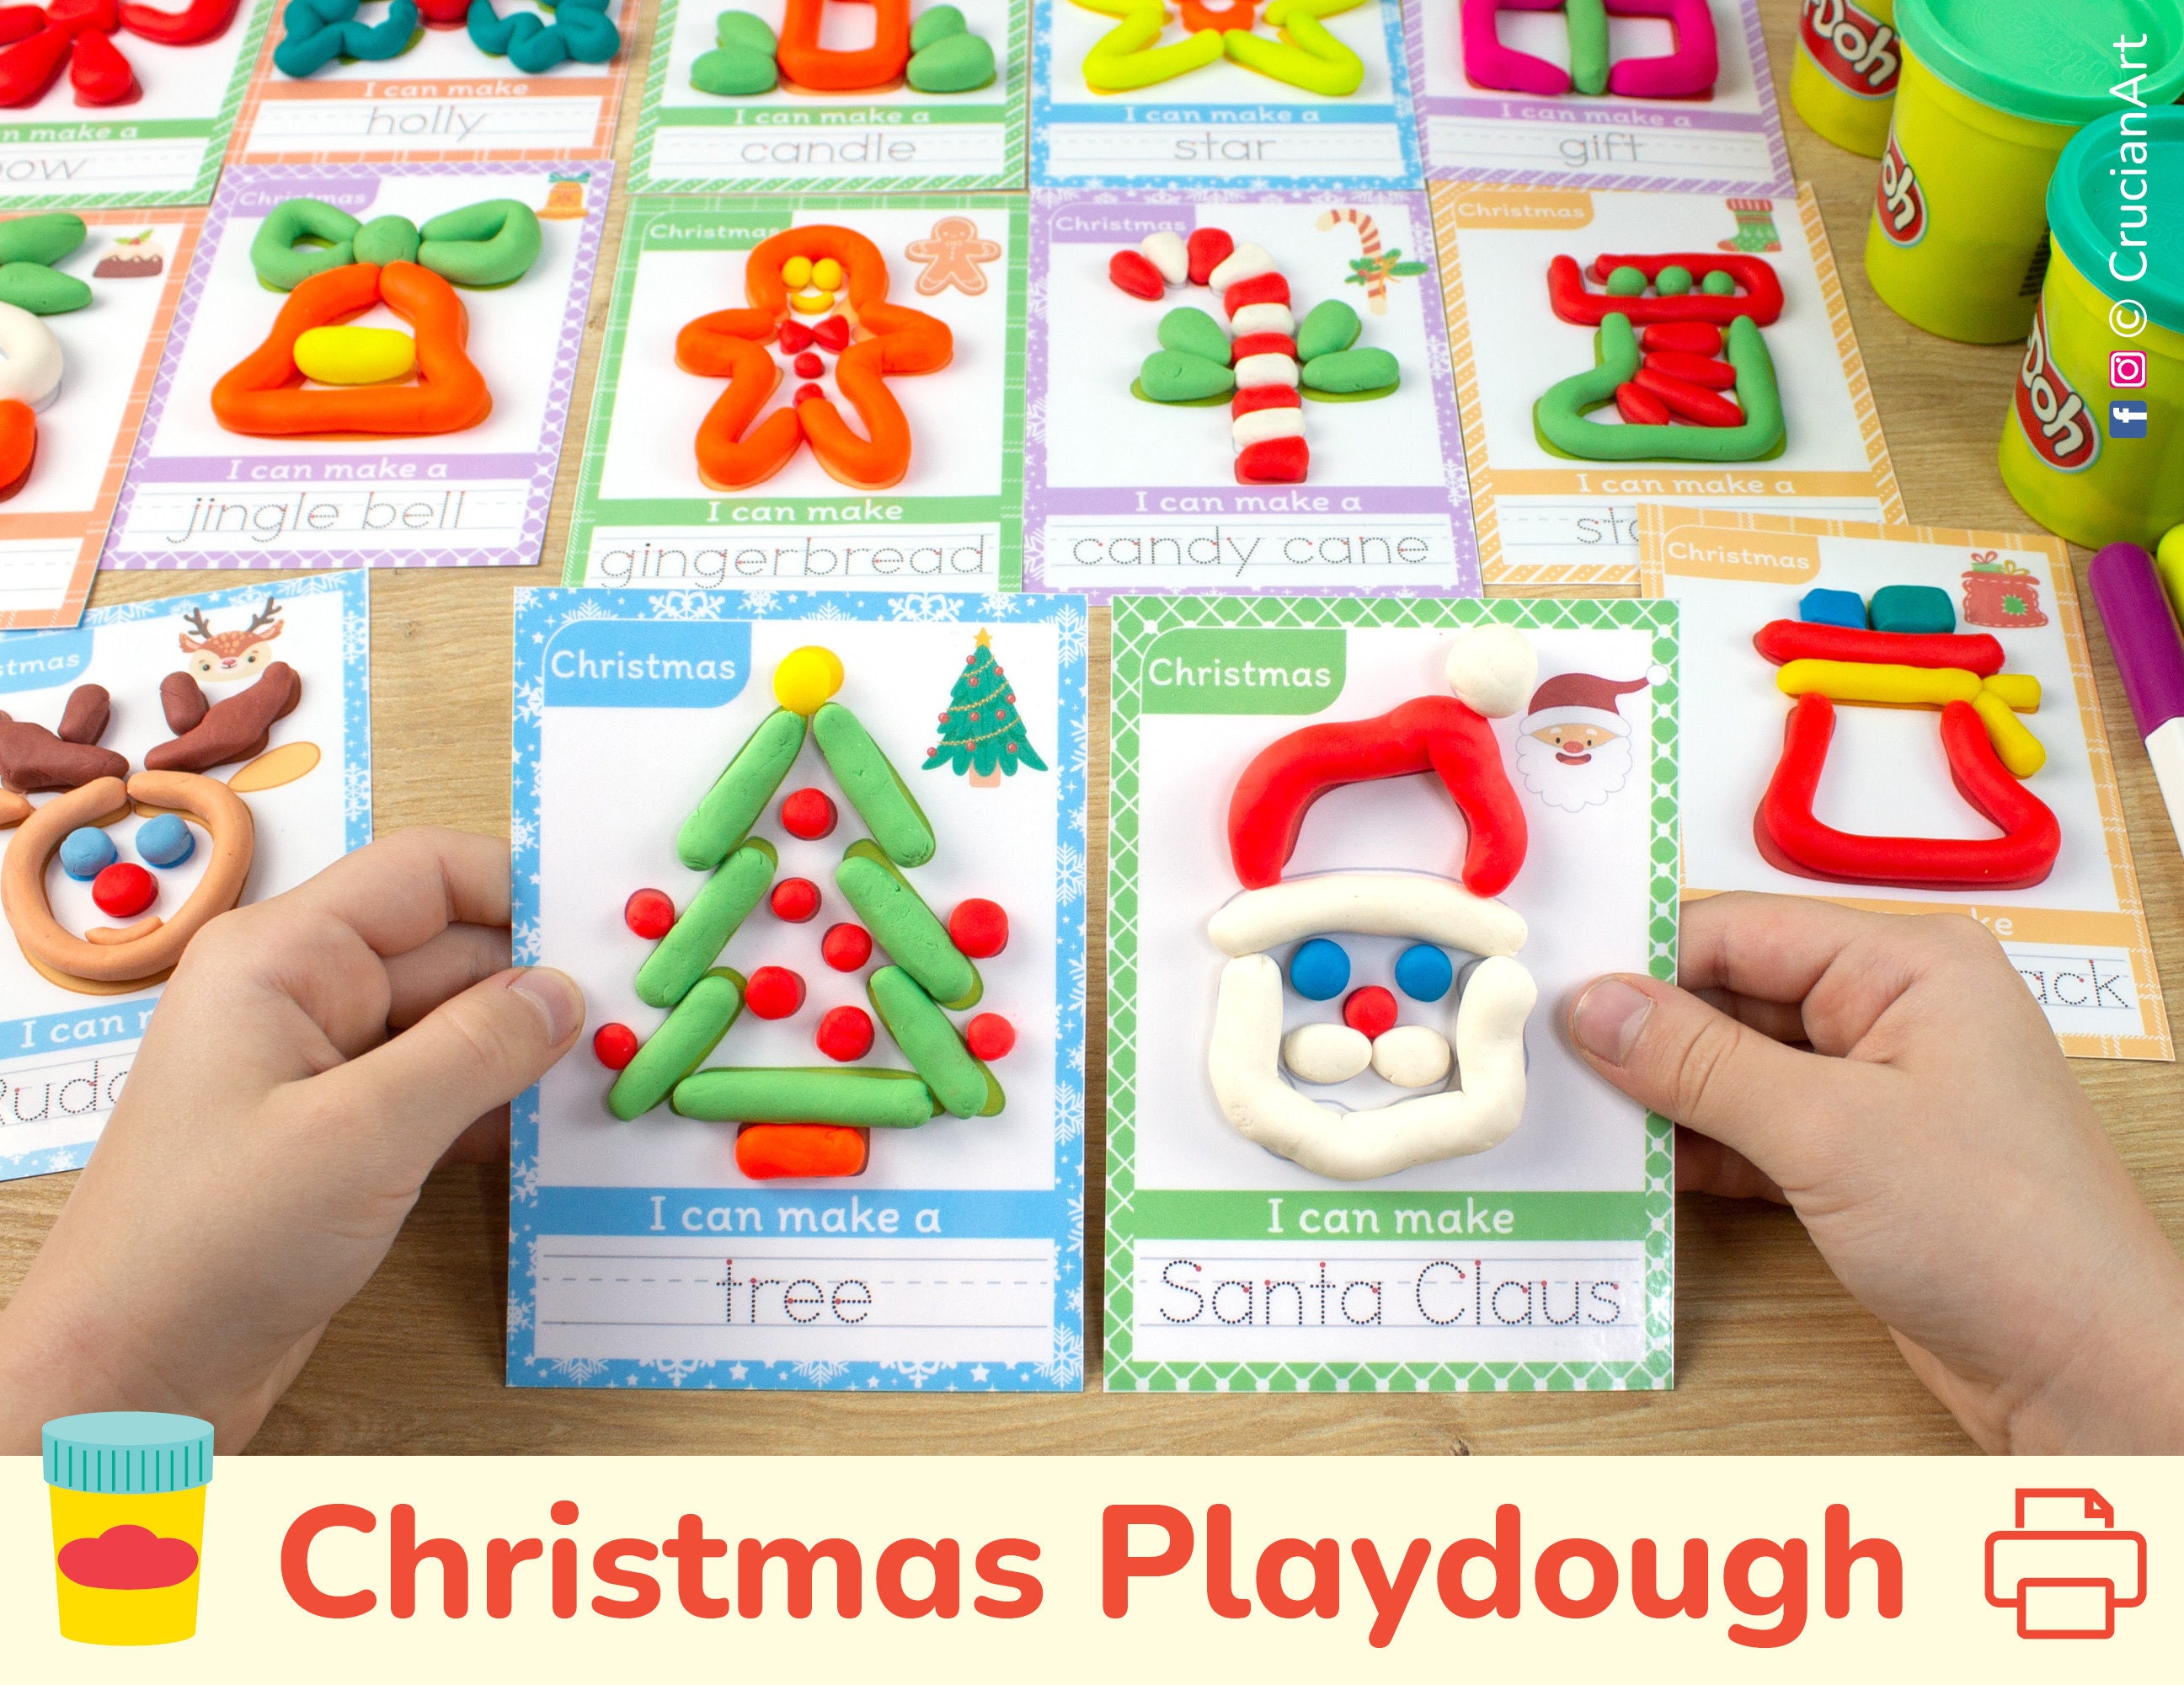  PLAY Christmas Playdough Sets for Kids Ages 4-8, DIY Dough Kit  Toys Christmas Crafts for Kids, Playdough Sets for Kids Ages 2-4 Safe &  Non-Toxic Playdough Toys Gifts for Kids 4-6